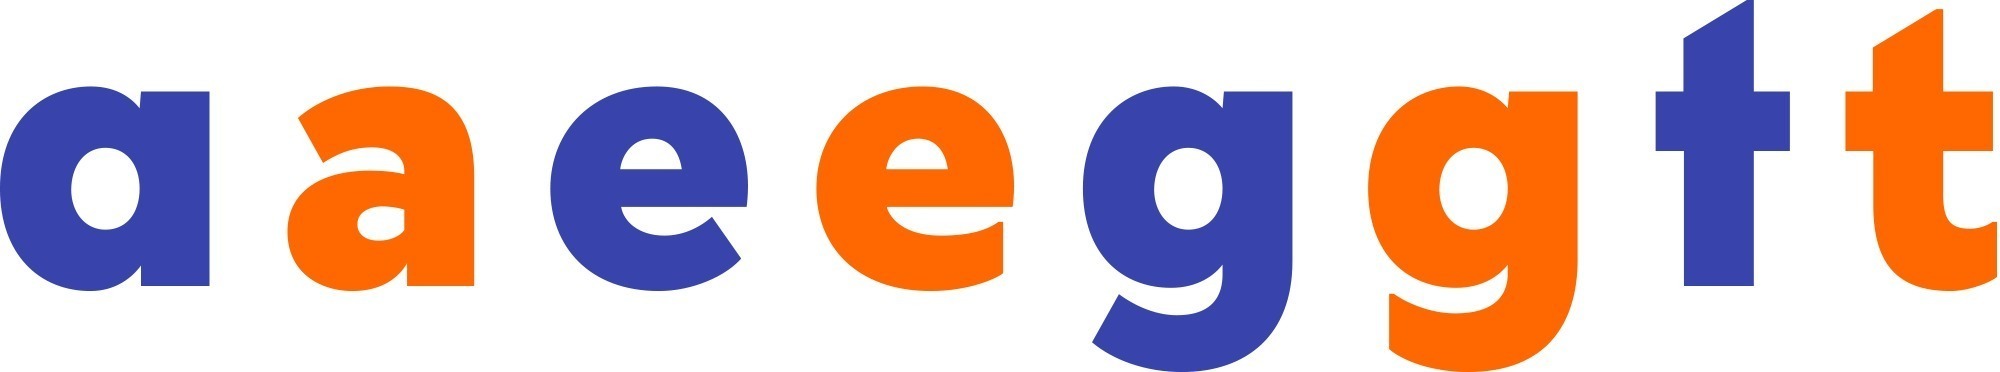 Ackermann and Bonge recognized the unique characteristics of Friedrich-Bauer-Grotesk, such as the stroke terminals in ‘C’ and ‘S’, and also applied them to alternative versions of ‘e’ and ‘g’.